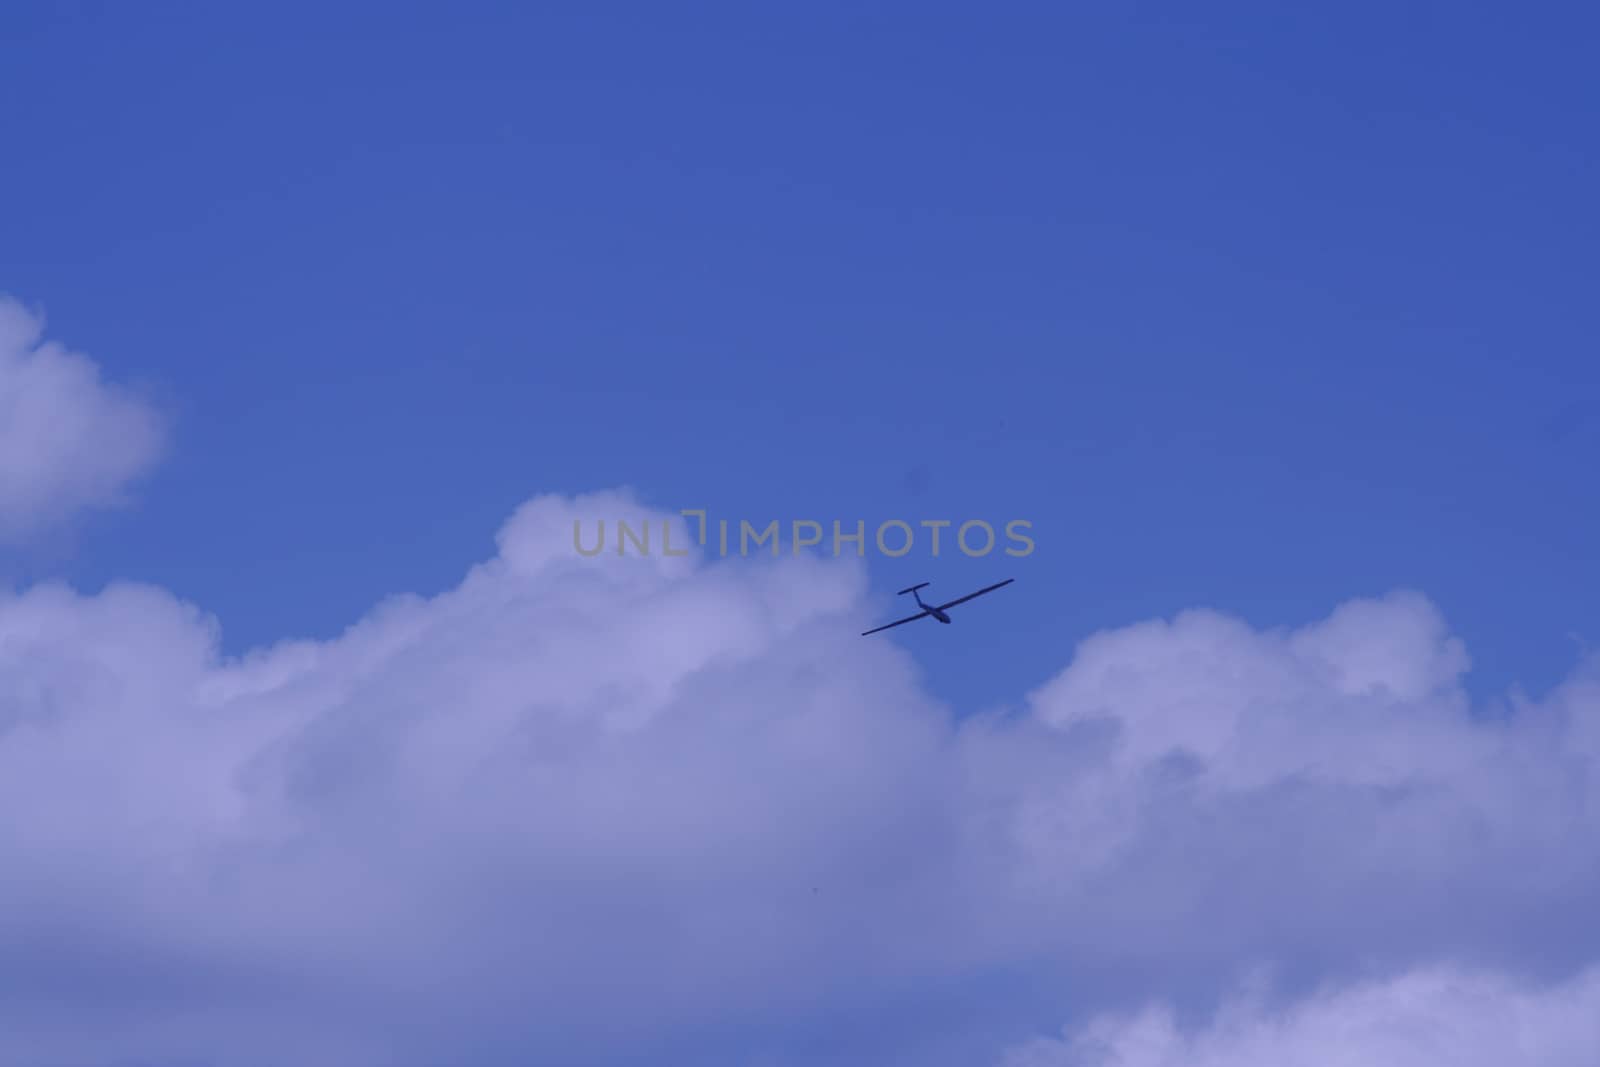 In the clouds, the far away aircraft High quality photo